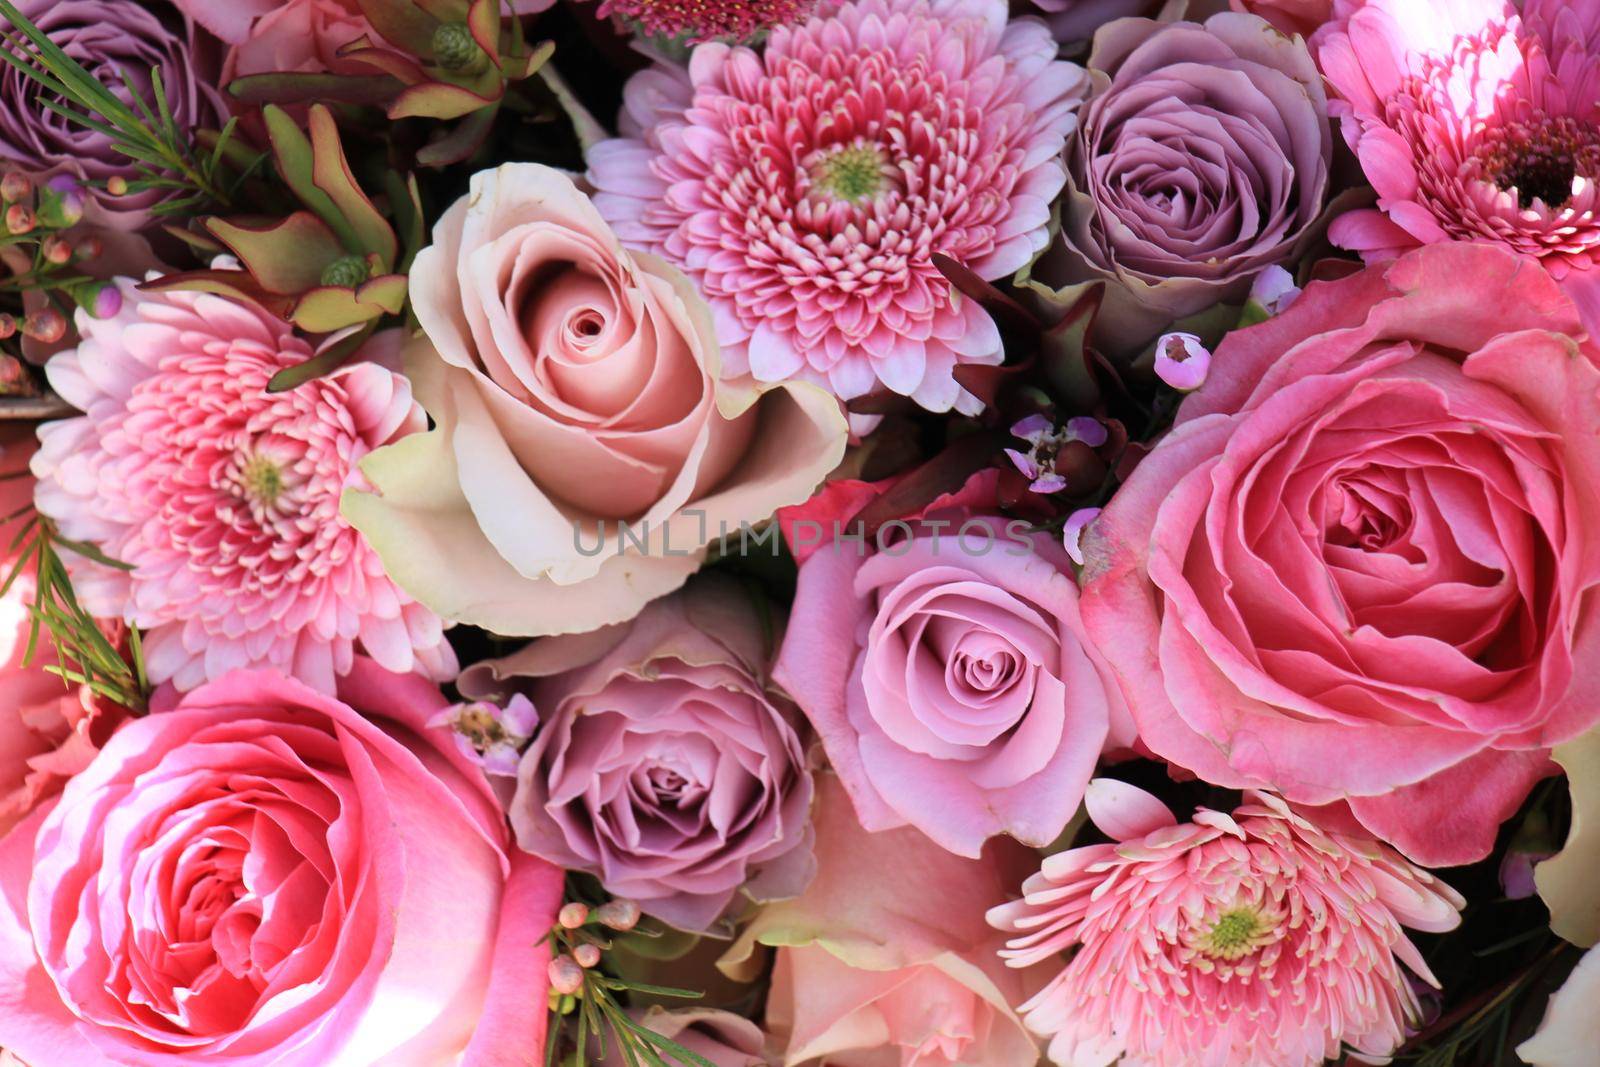 Mixed flowers in different shades of pink in a floral wedding decoration by studioportosabbia